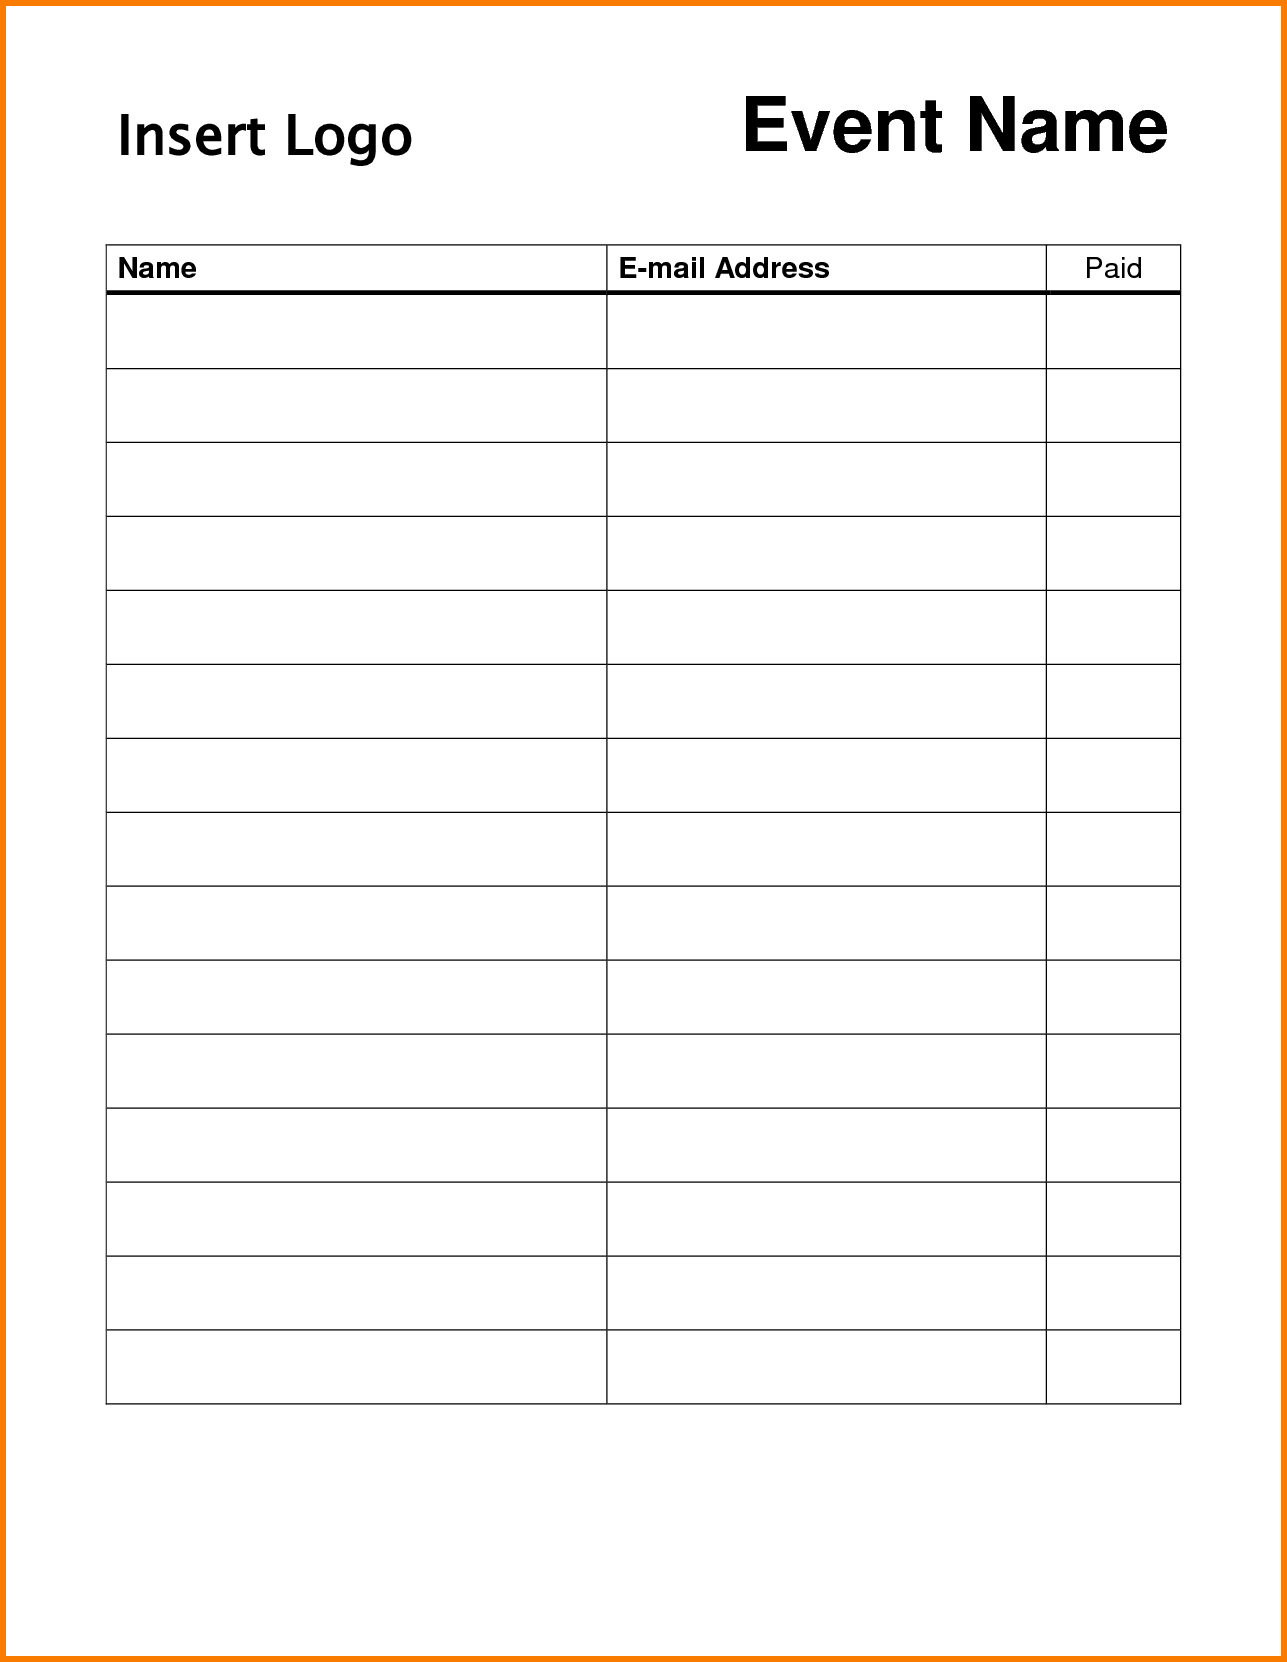 23+ Sample Sign Up Sheet Templates – PDF,Word, Pages, Excel 